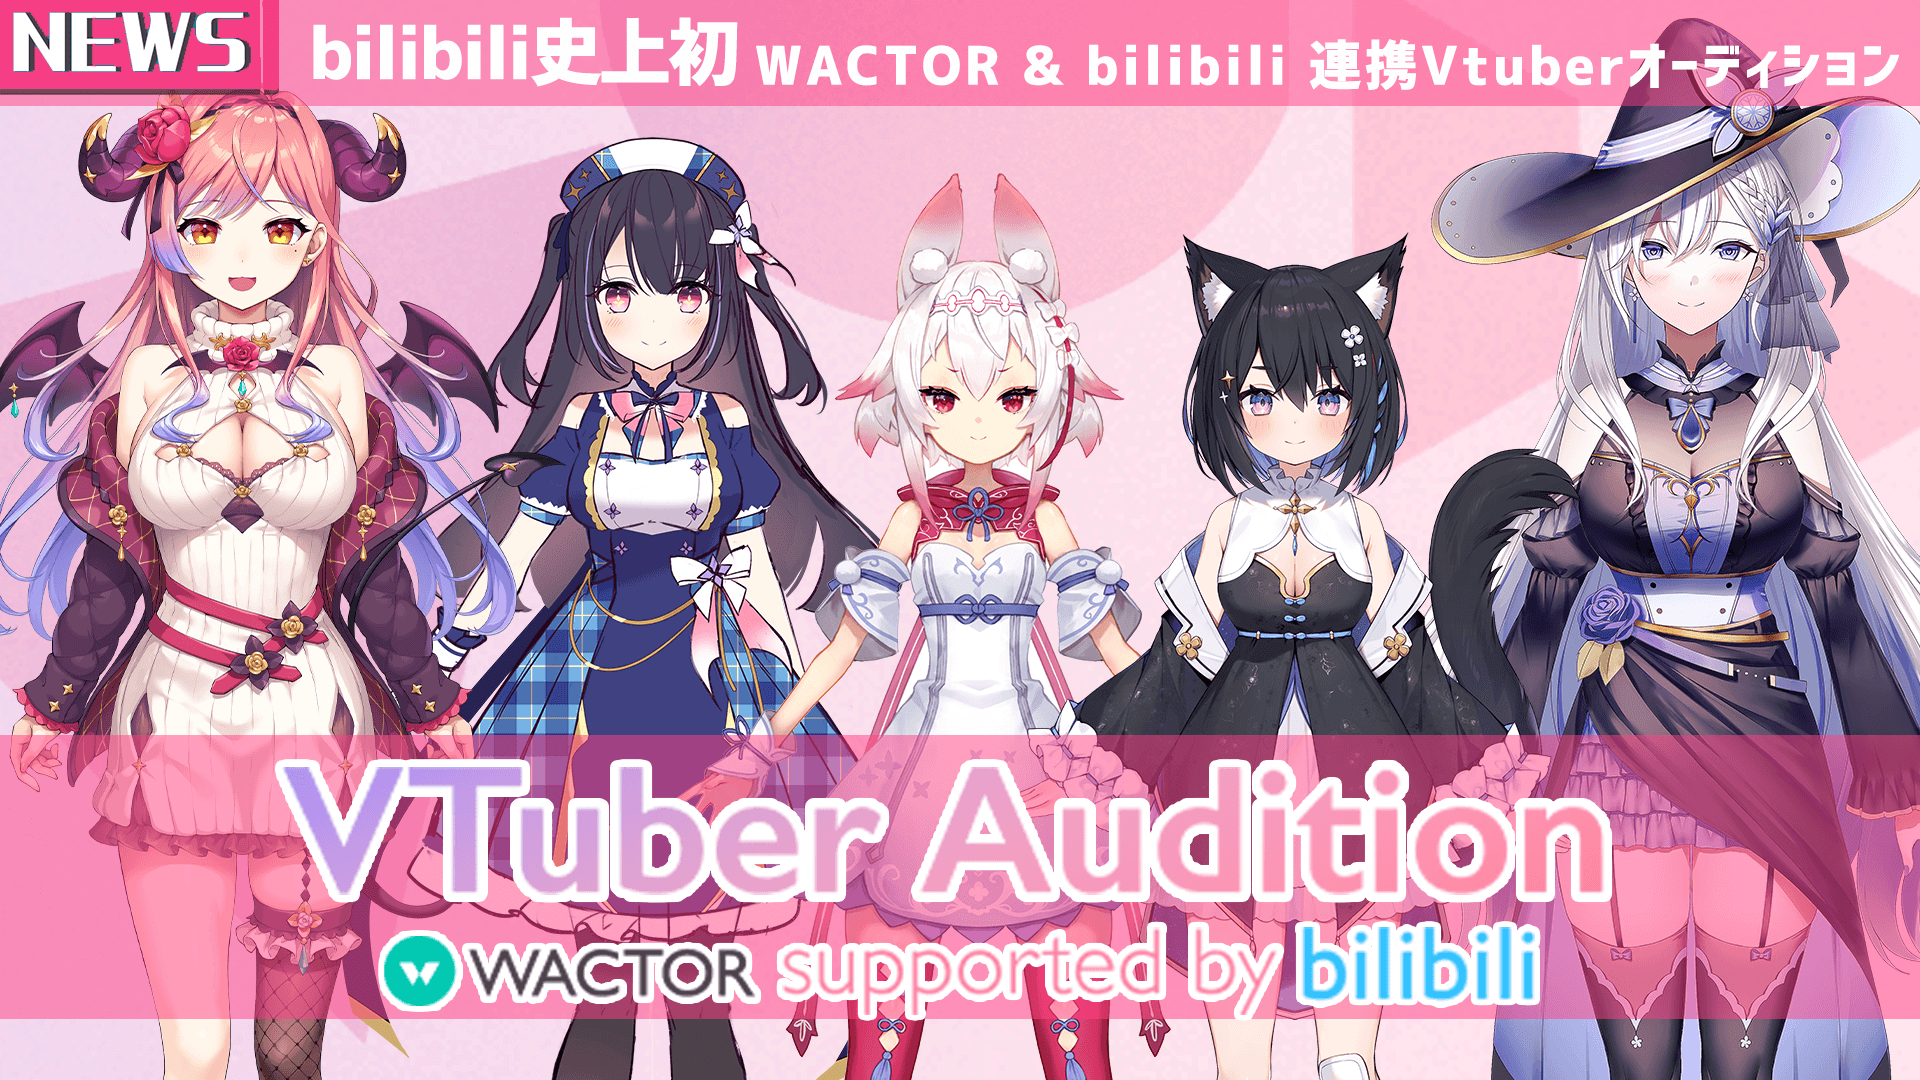 wactor-vtuber-audition-supported-by-bilibili-2